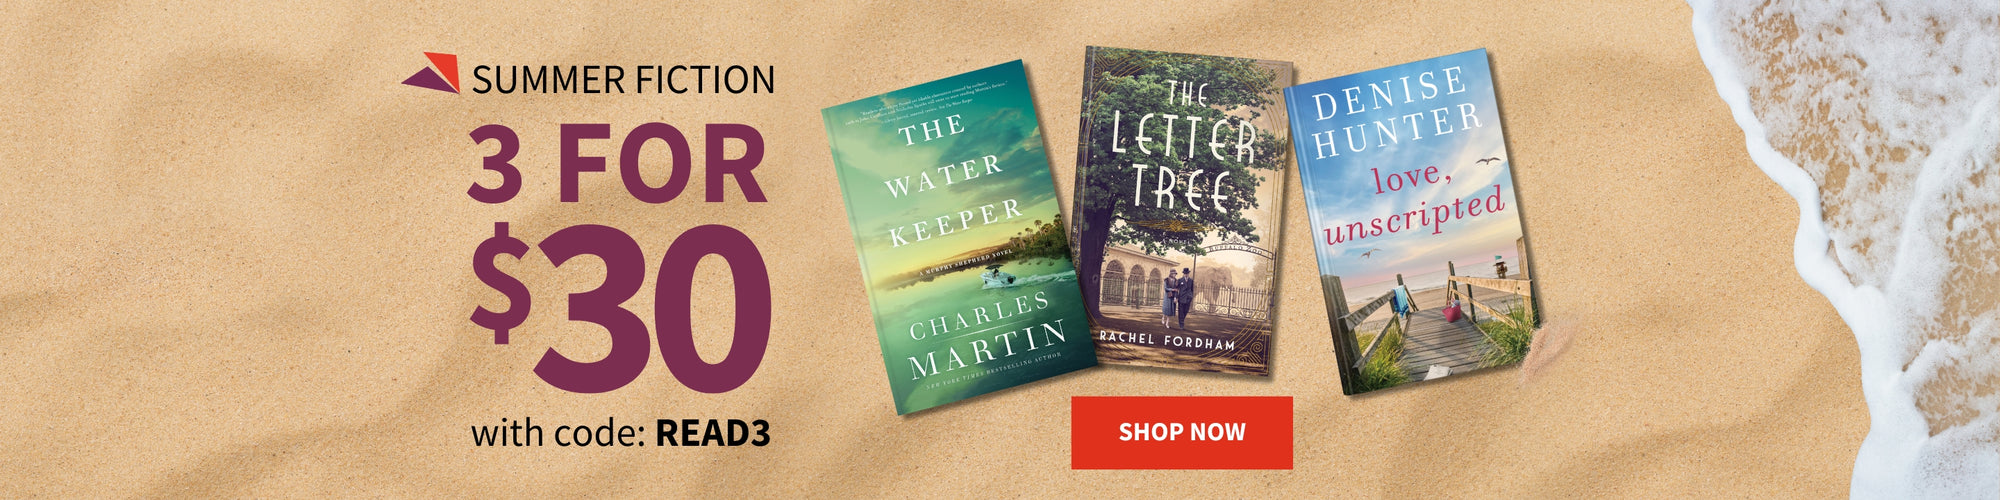 Summer Fiction 3 for $30 with code READ3